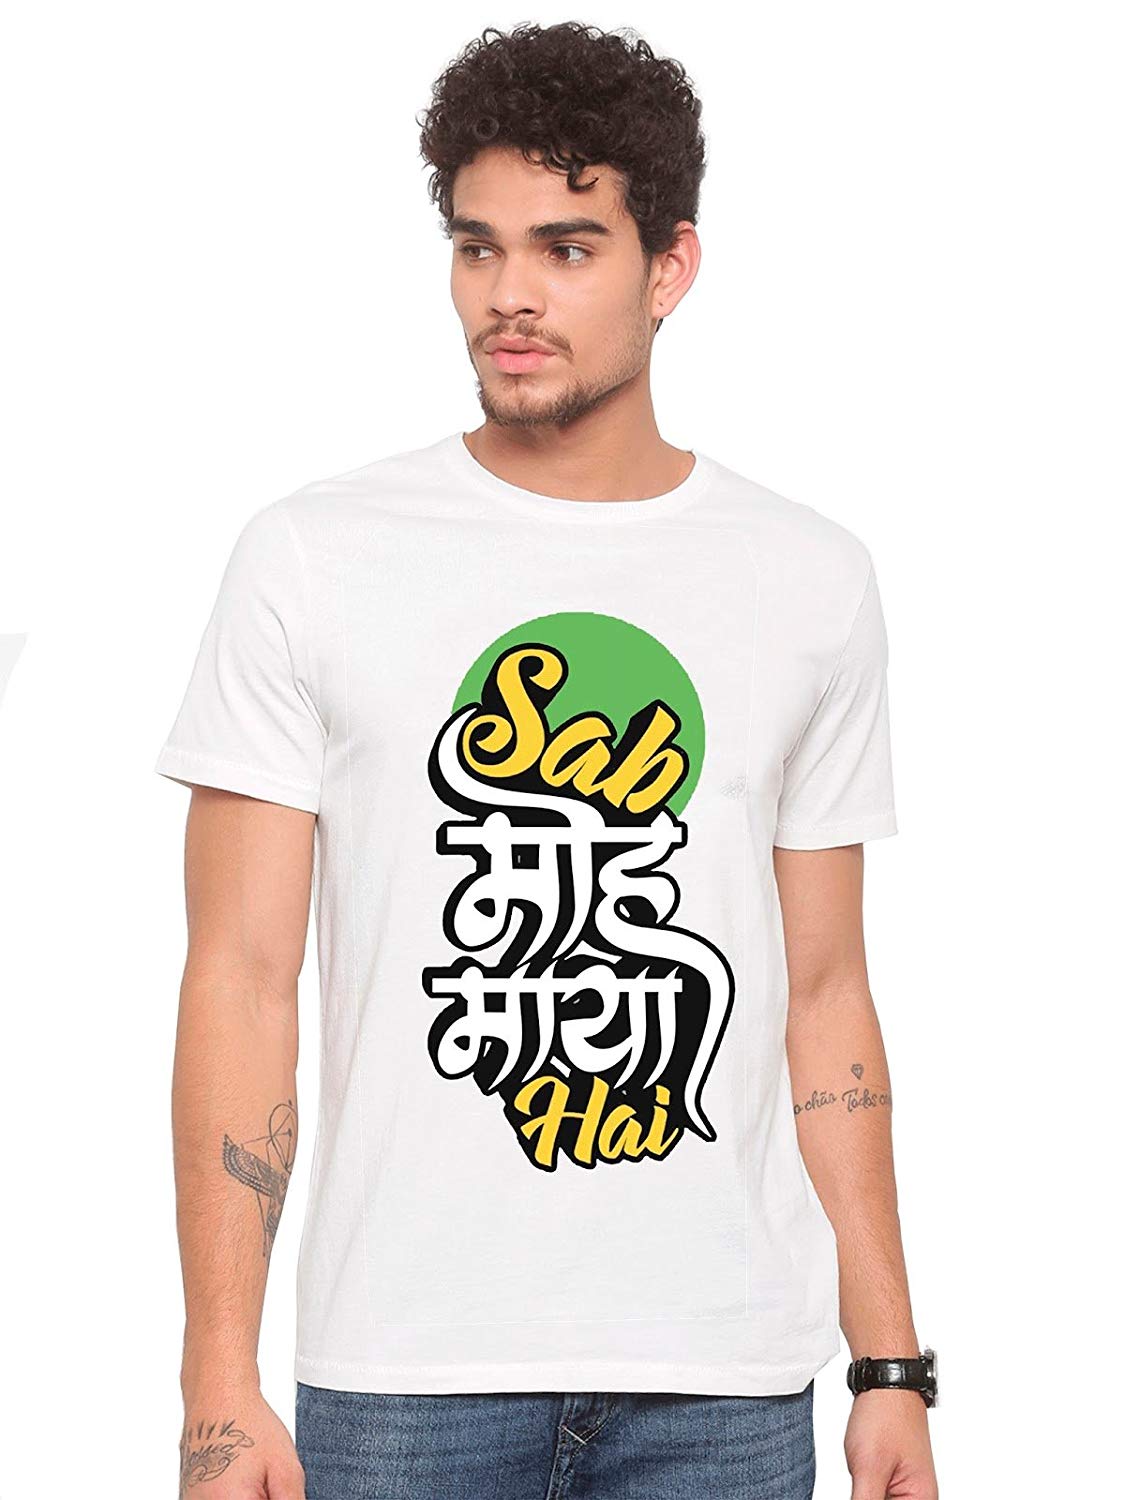 DOUBLE F ROUND NECK HALF SLEEVE WHITE COLOR SAB MOH MAYA HAI PRINTED T-SHIRT FOR MEN